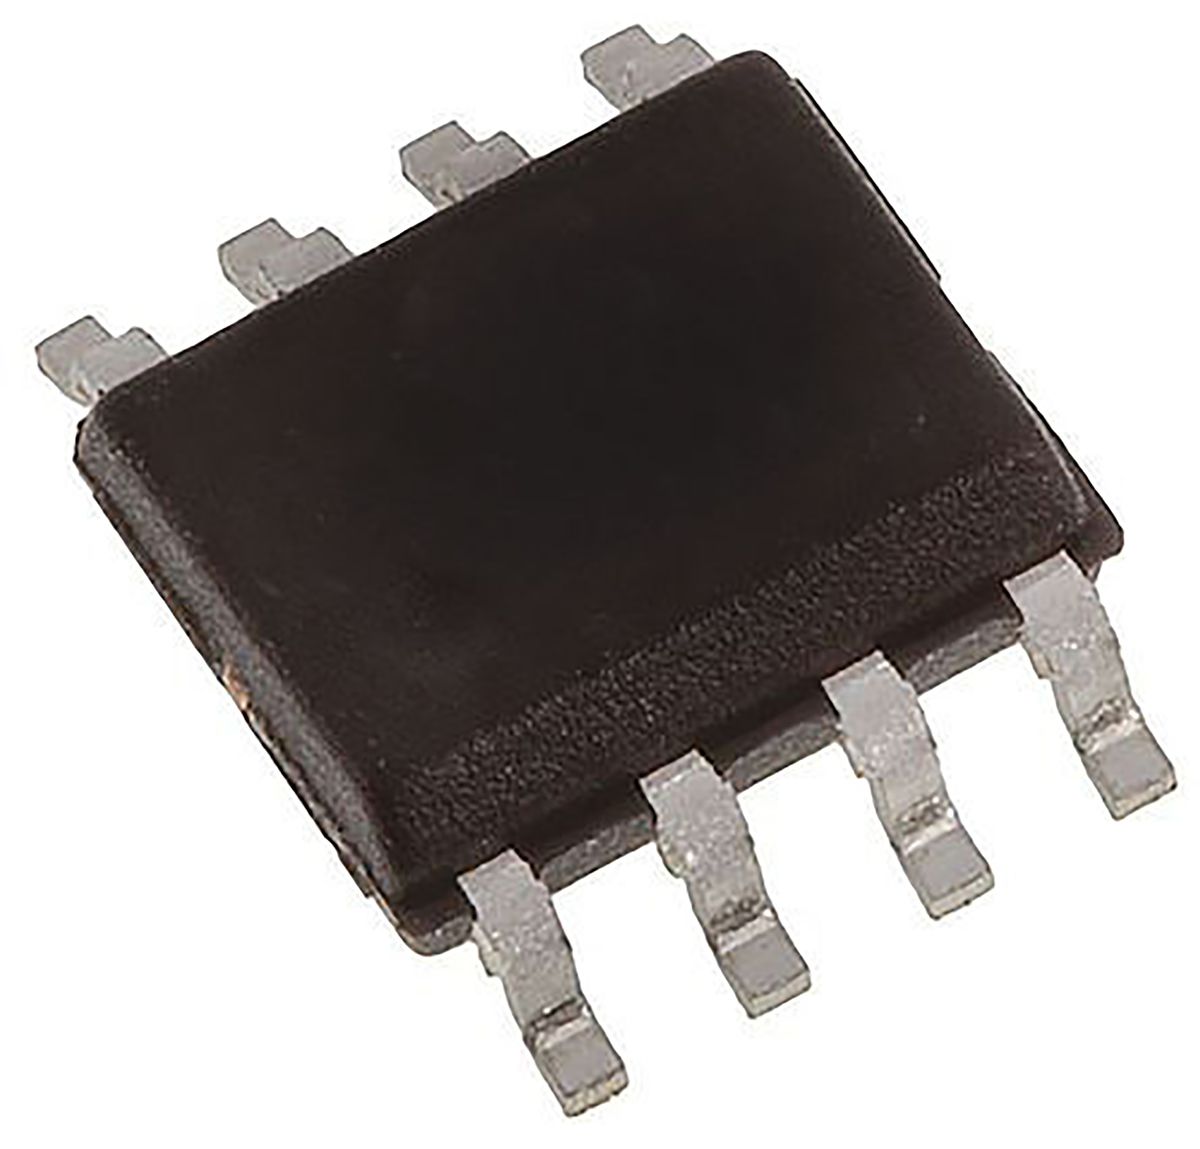 X9C104SZ, Digital Potentiometer 100kΩ 100-Position Linear Serial-3 Wire 8 Pin, SOIC